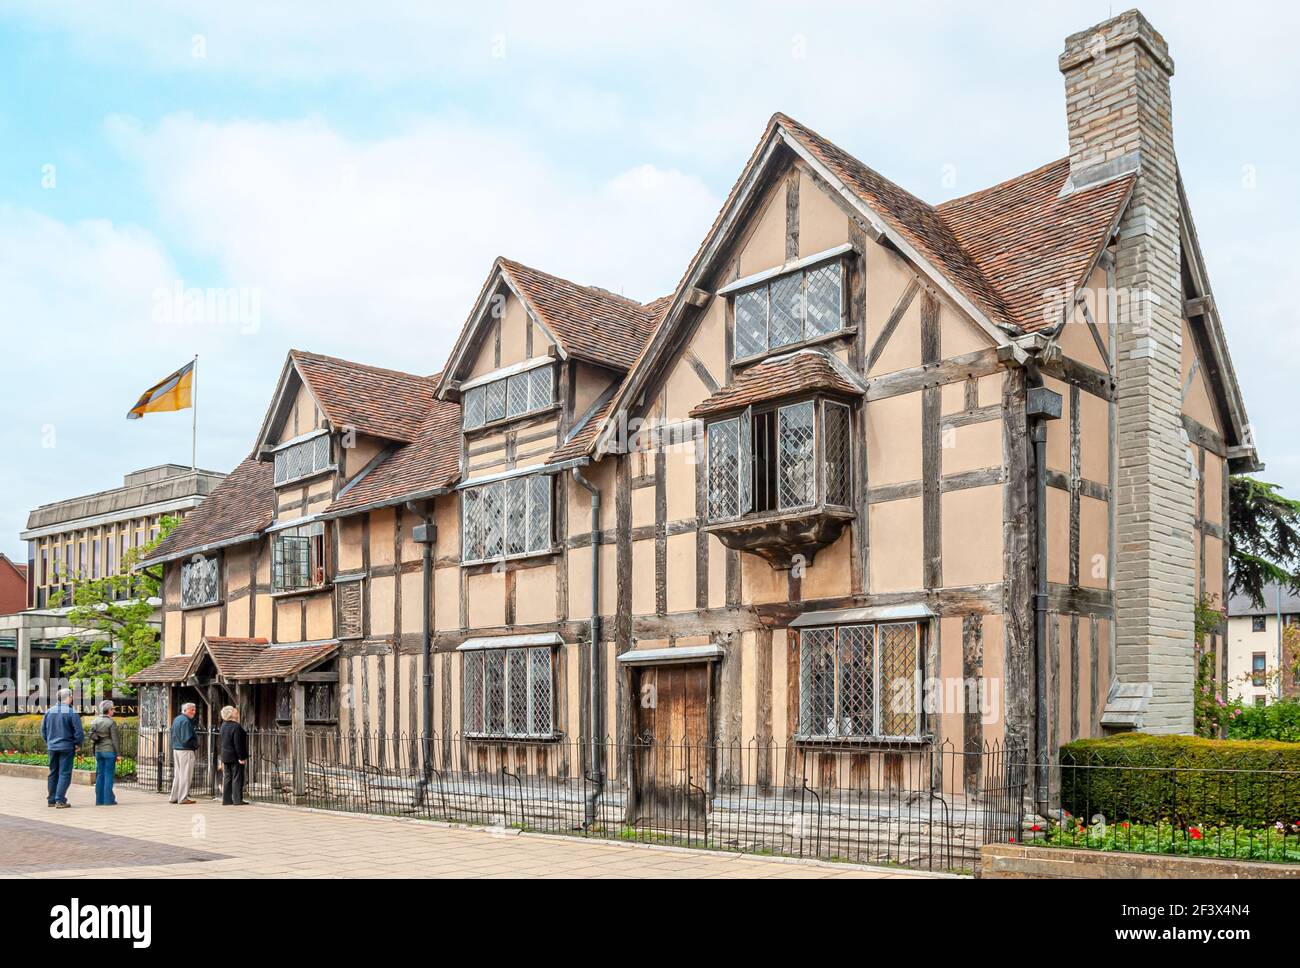 Birth Place building of Shakespeare where he was born in 1564 in Stratford upon Avon, England Stock Photo